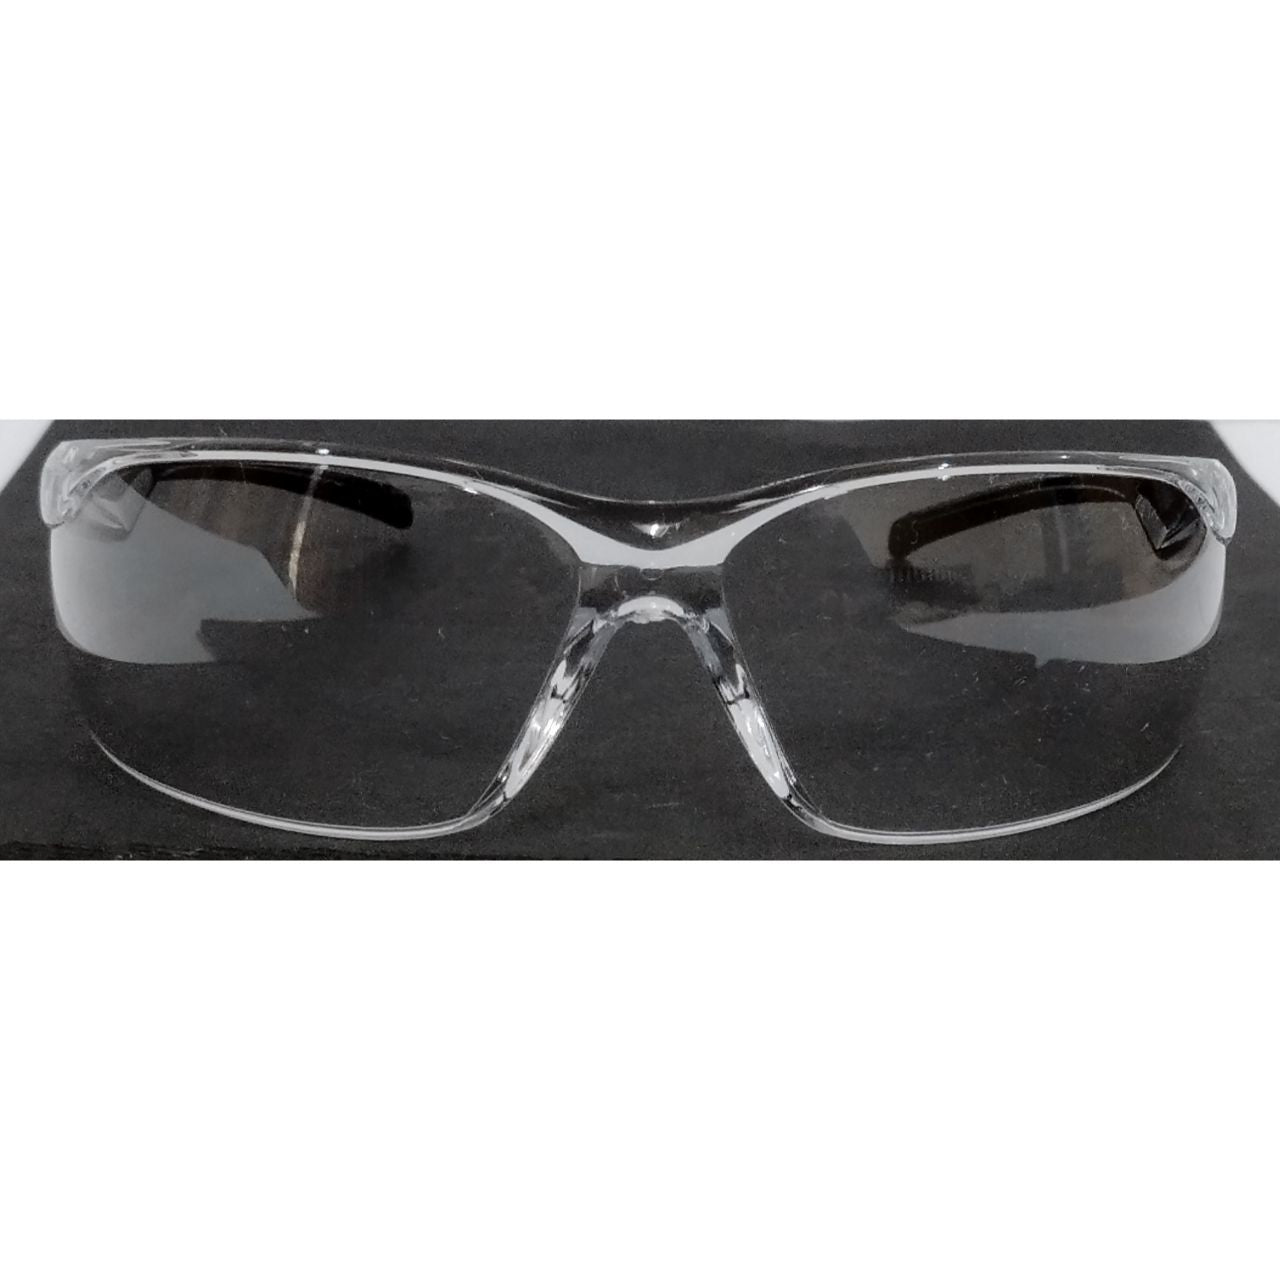 Clear Day Night Wraparound Cycling Driving Sunglasses